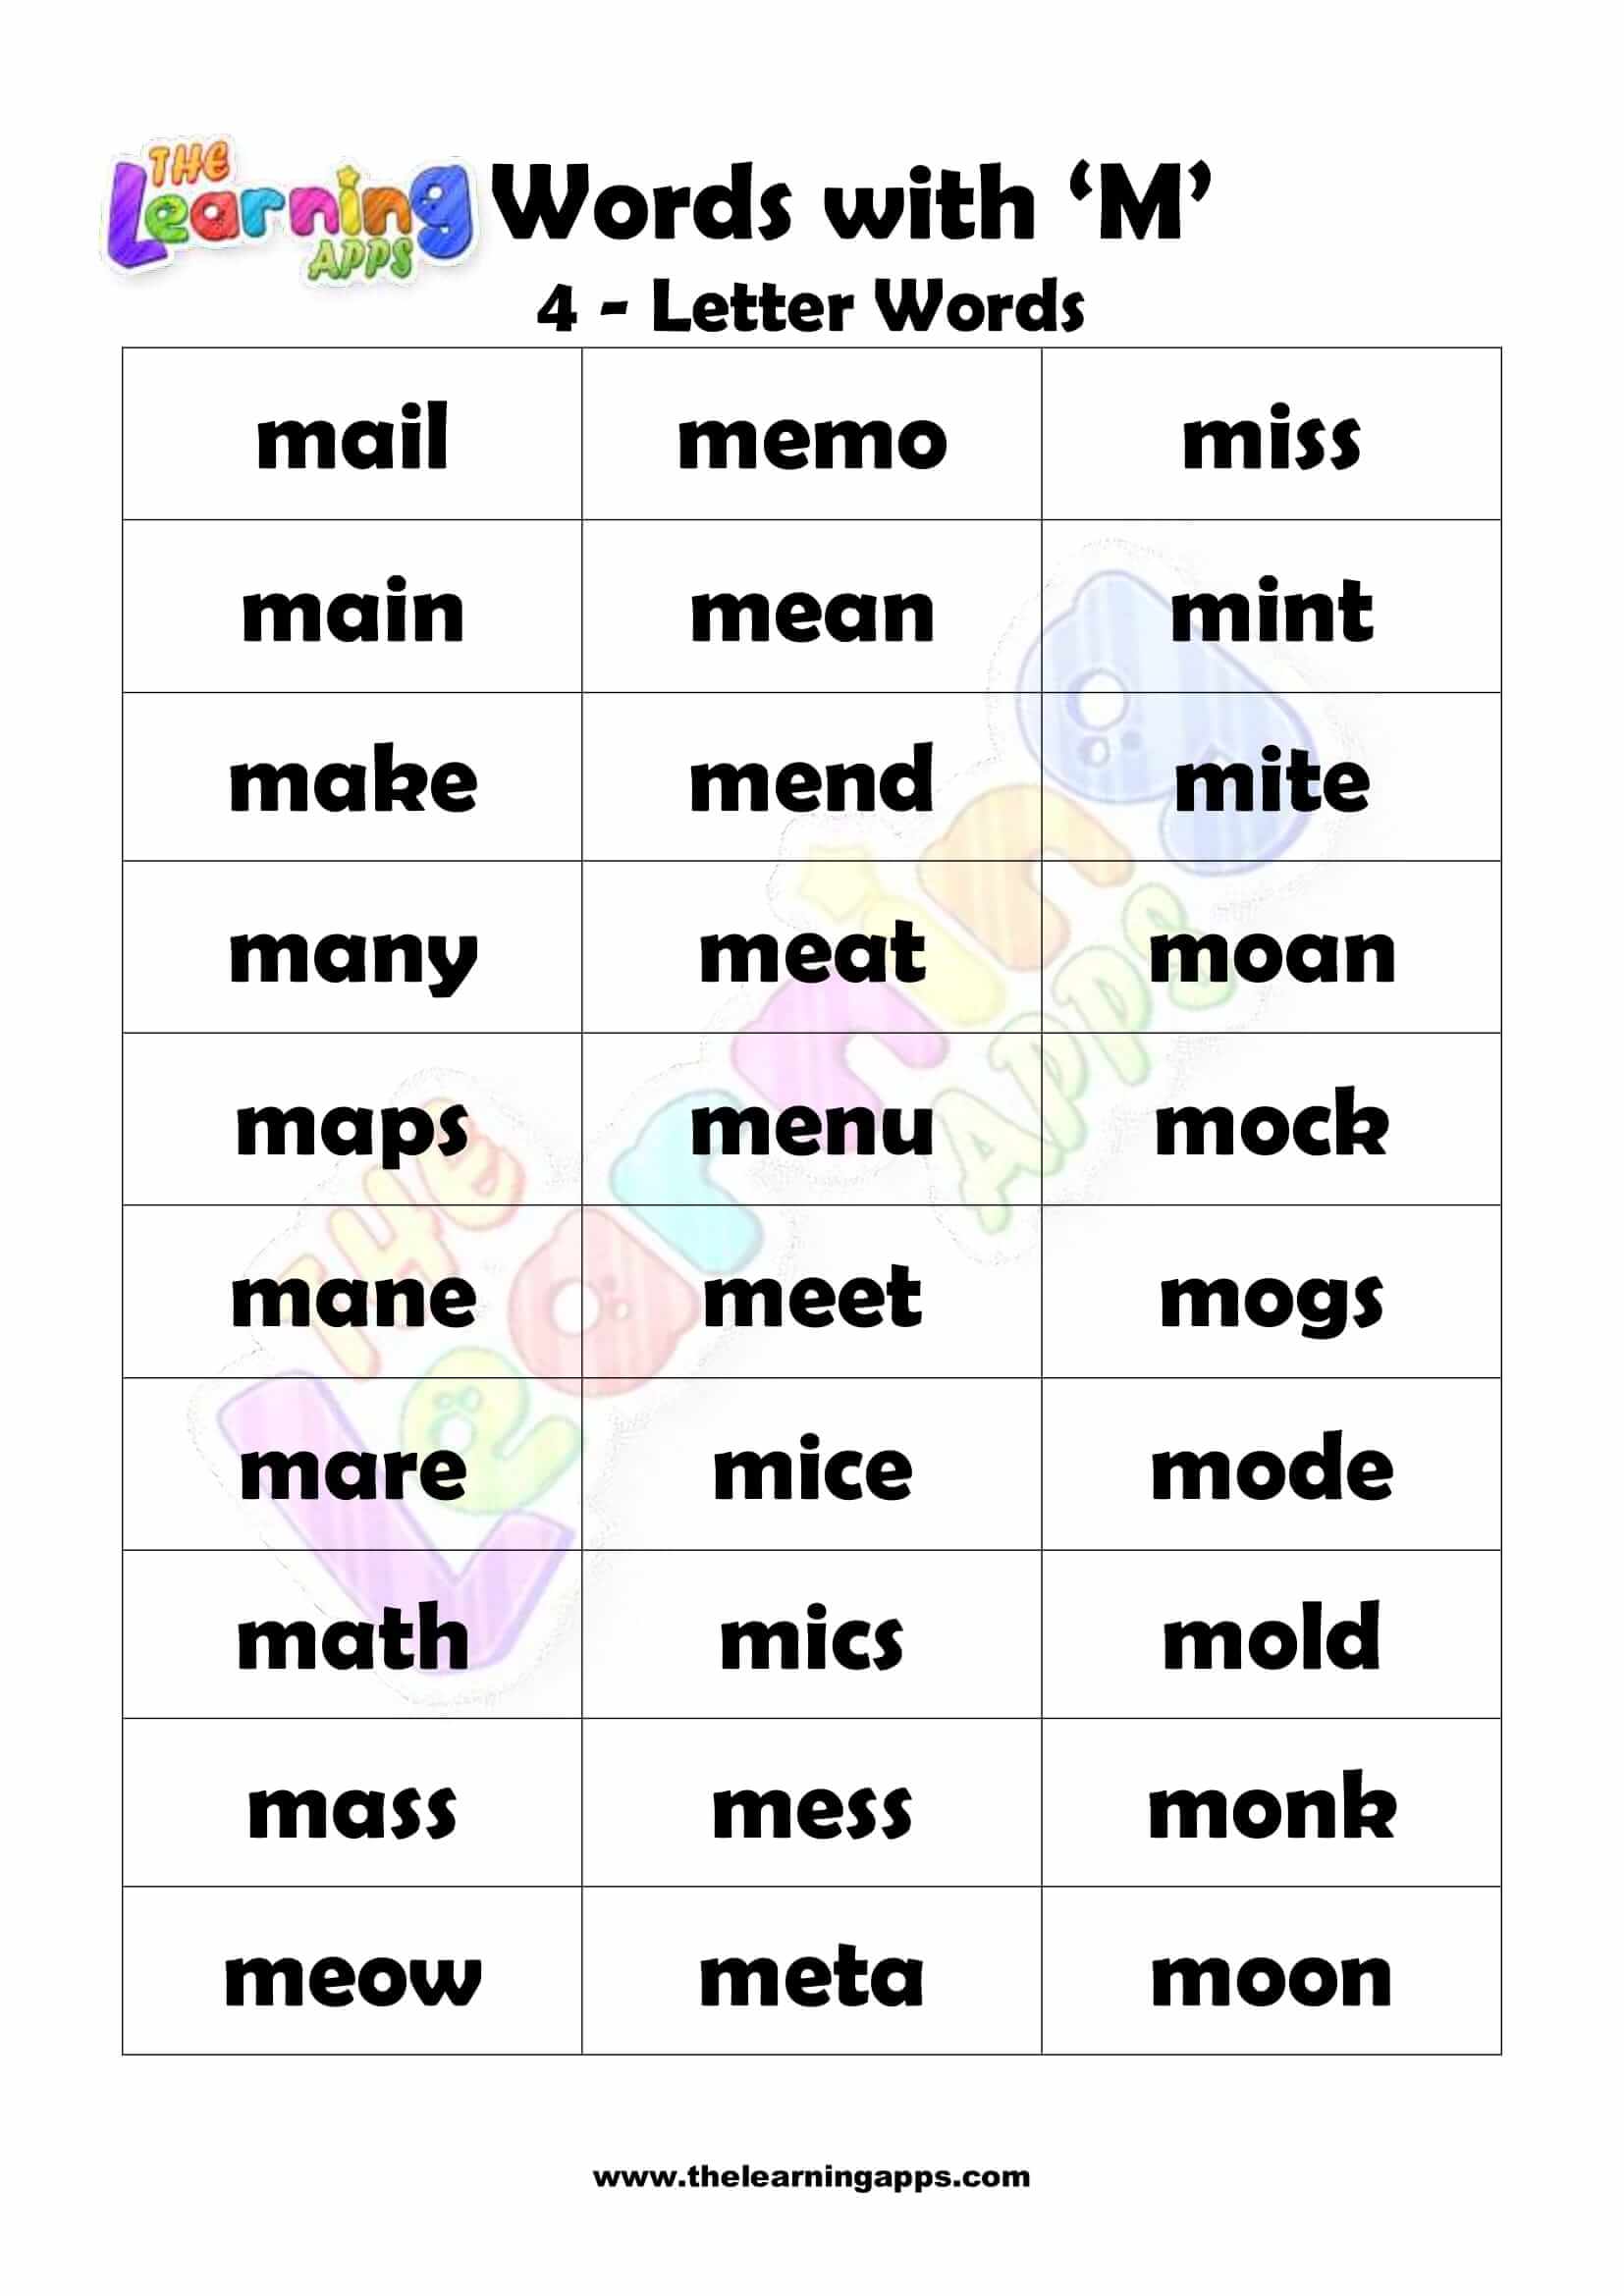 4 LETTER WORD STARTING WITH M-2